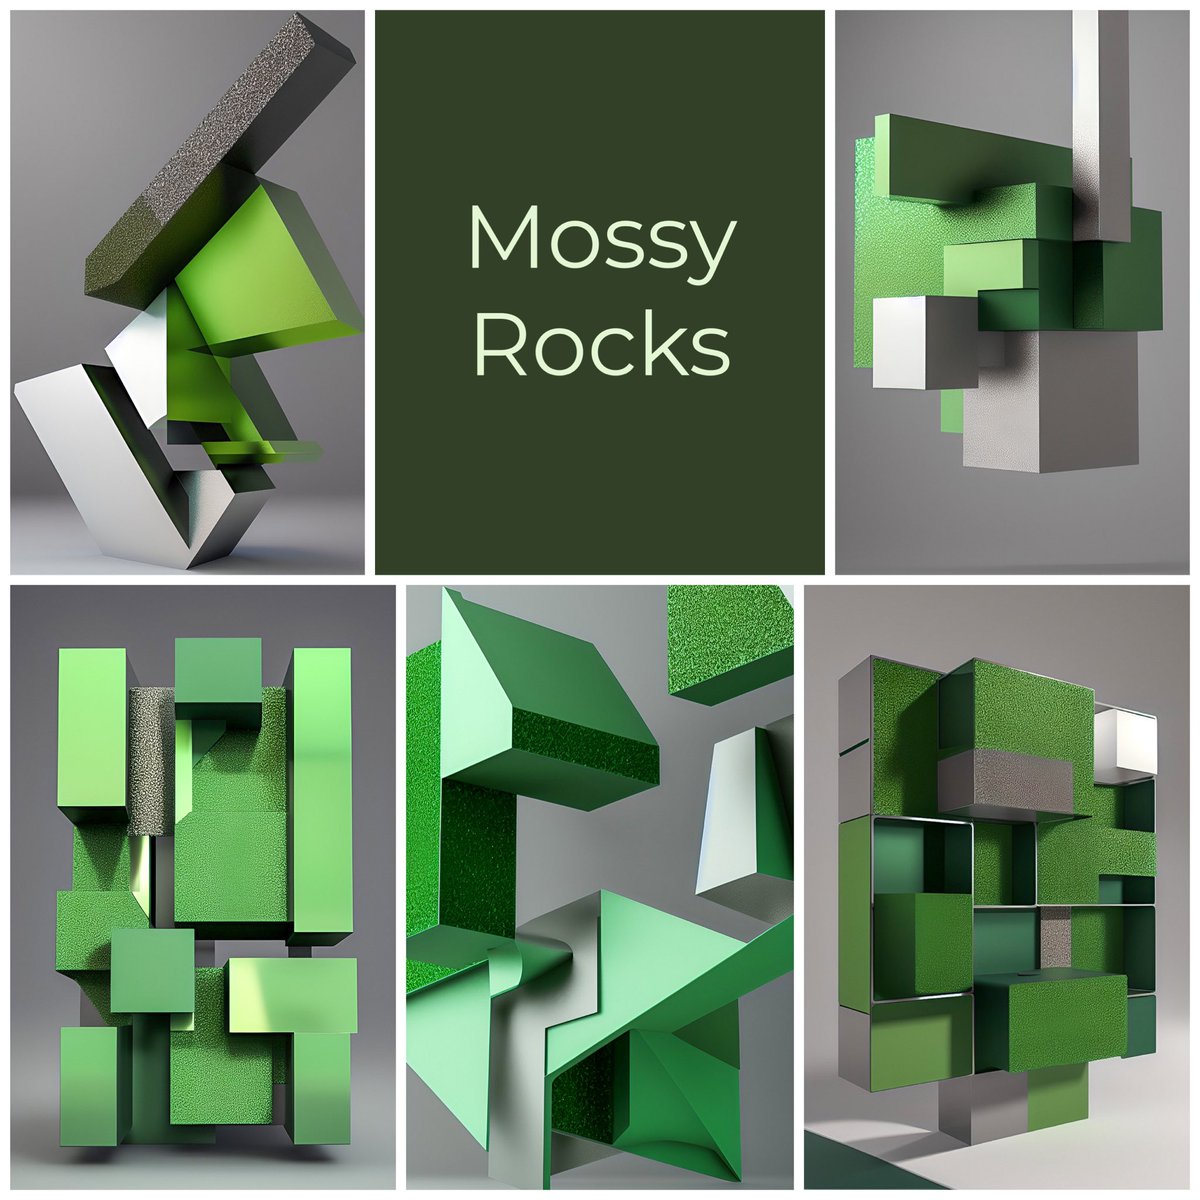 Mossy Rocks collection. Inspired by hikes in the woods. I’ve always loved mossy areas. #digitalsculpture #art